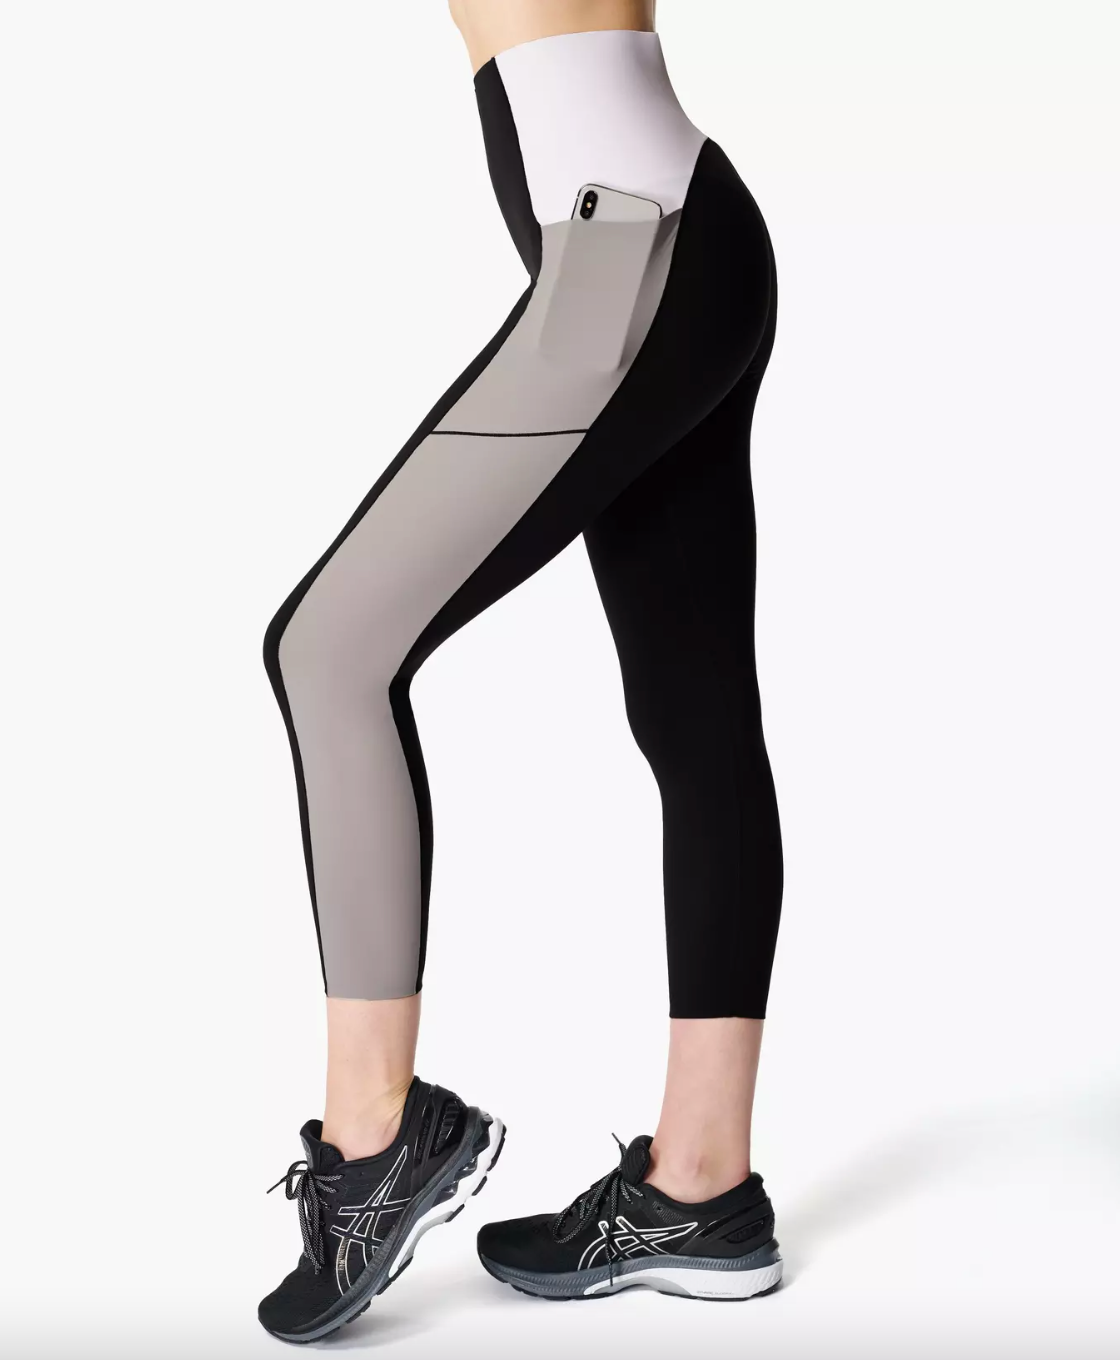 Sweaty Betty Sale: Get Up to 70% Off Leggings and Go-To Summer Workout  Styles